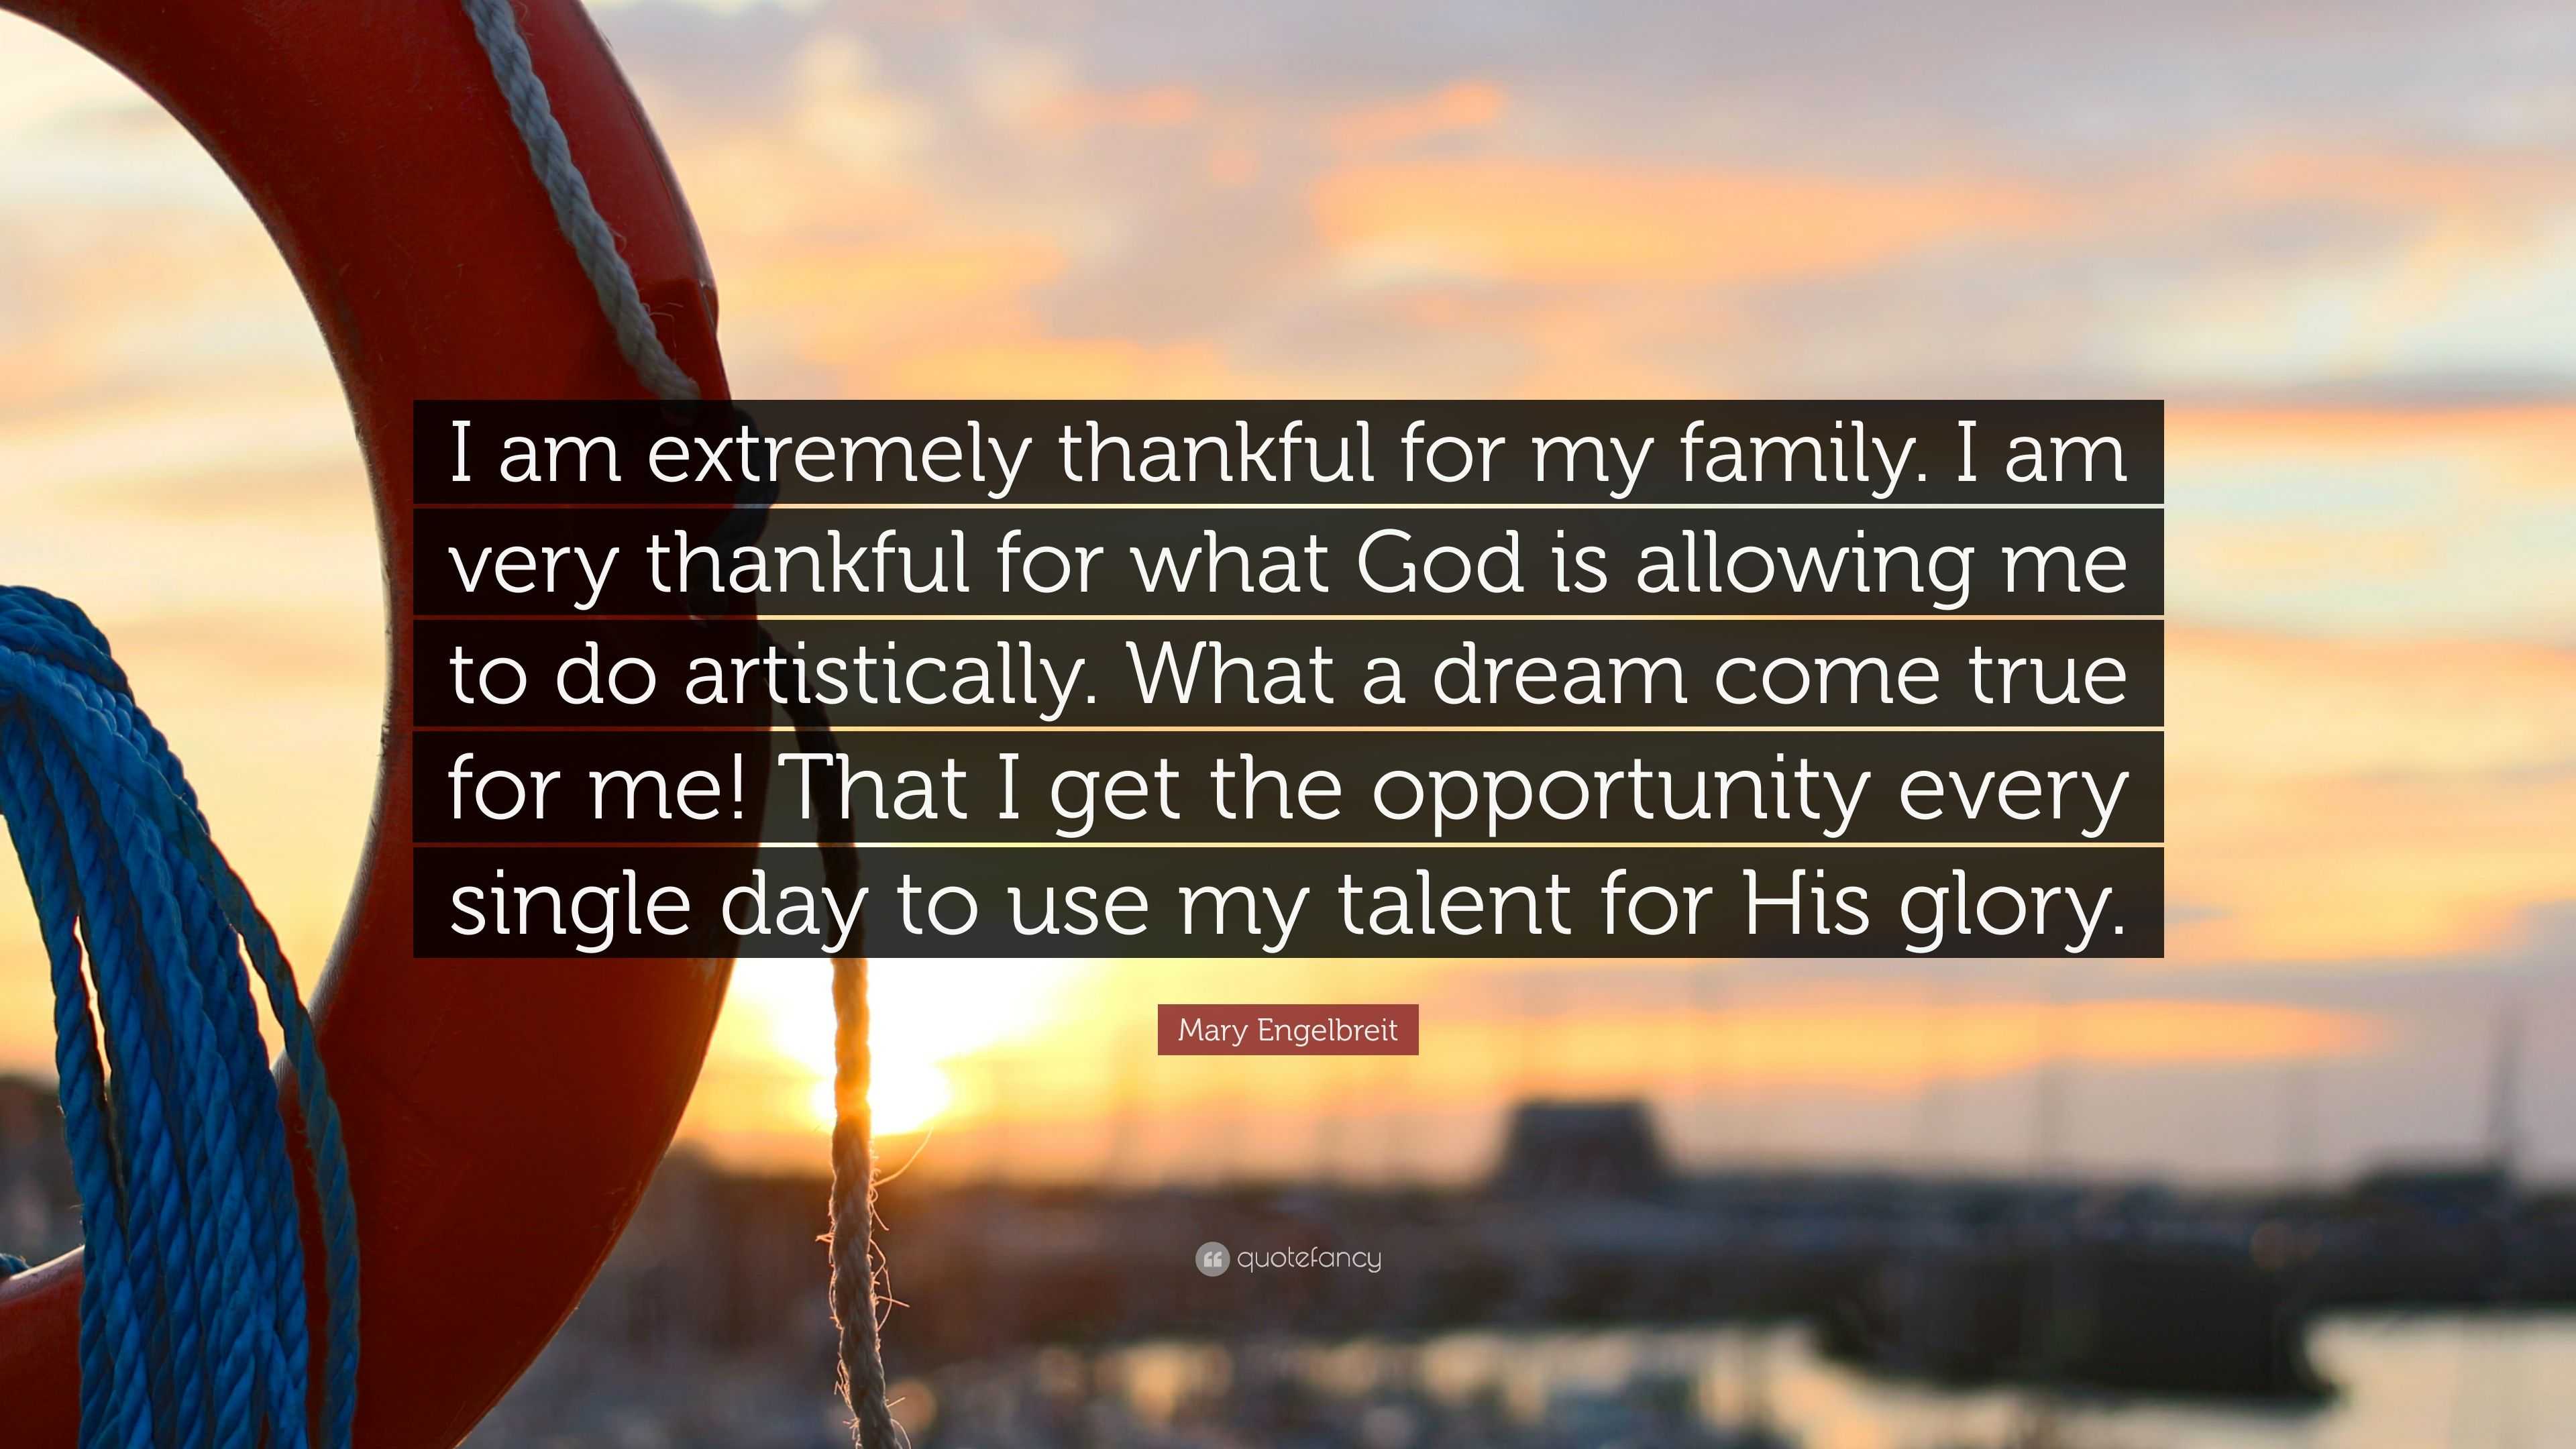 Mary Engelbreit Quote: “I am extremely thankful for my family. I am very  thankful for what God is allowing me to do artistically. What a dream c”